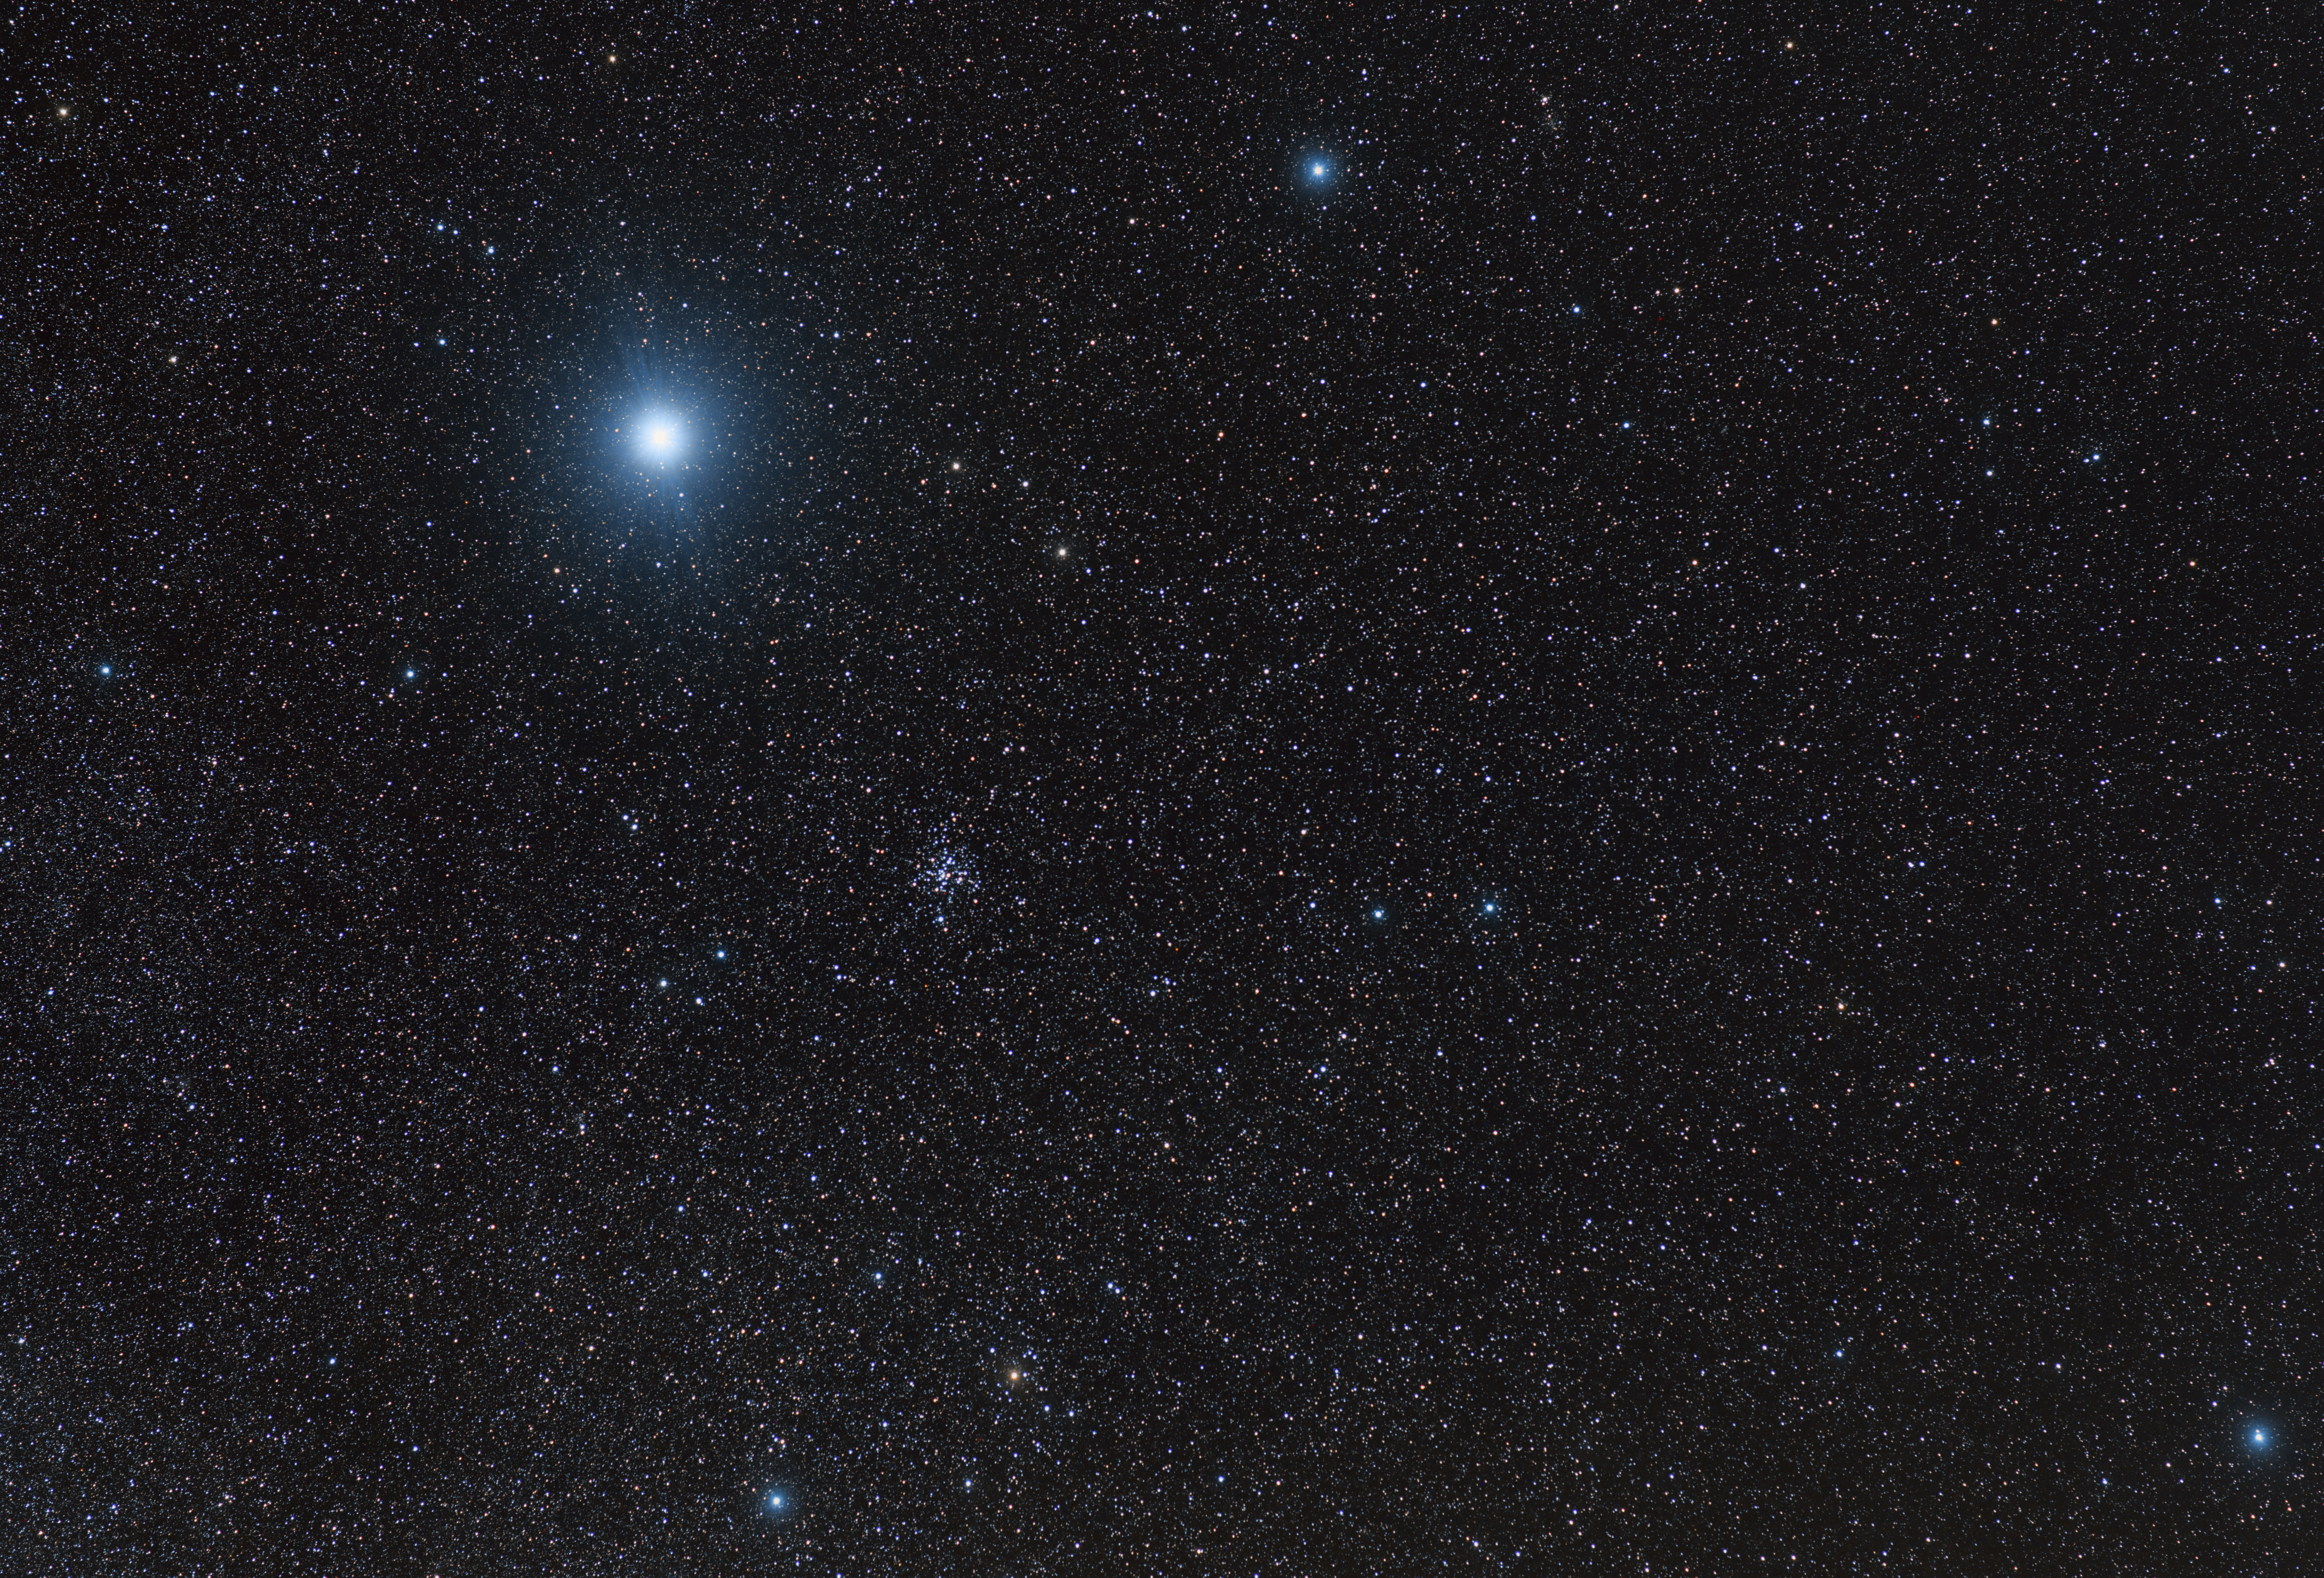 Brightest star in the sky? Find out which star is brightest tonight